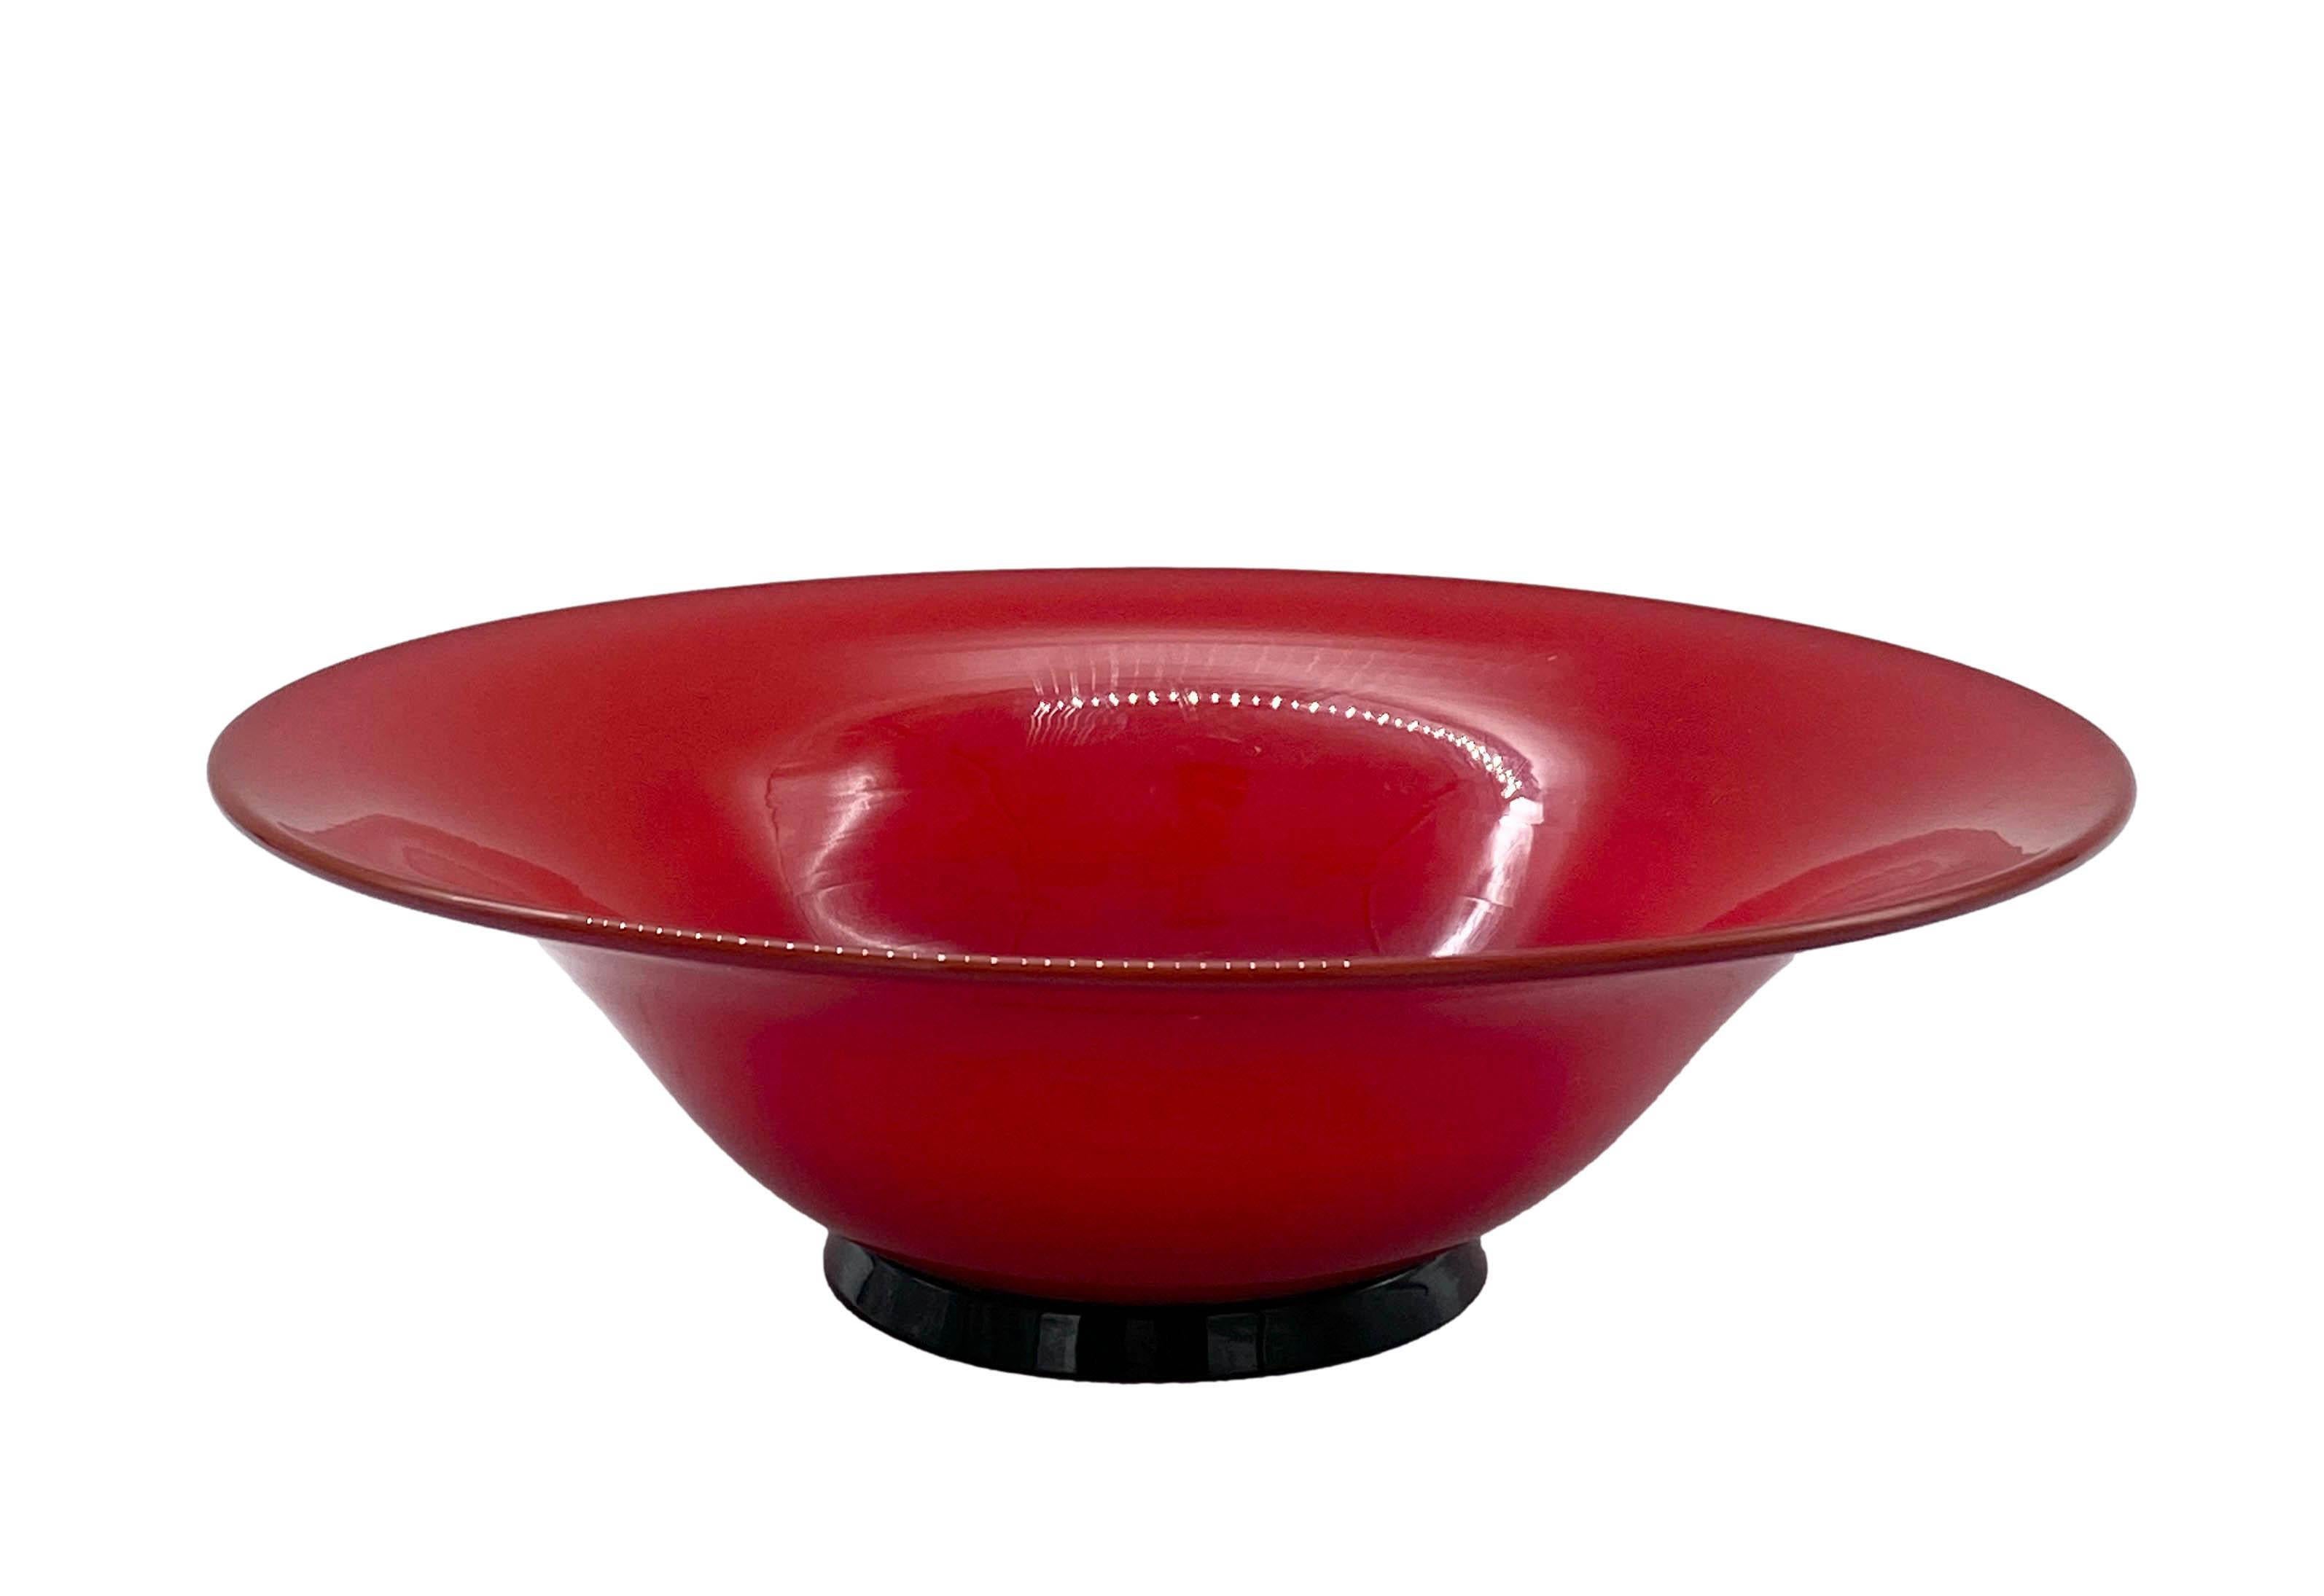 Bowl in red and milky coated Murano glass, produced by the famous artistic glassworks Venini, based on the collection of the 1930s designed by Carlo Scarpa. Inside, the red glass takes on a warm, amber hue. It rests on a small circular black glass